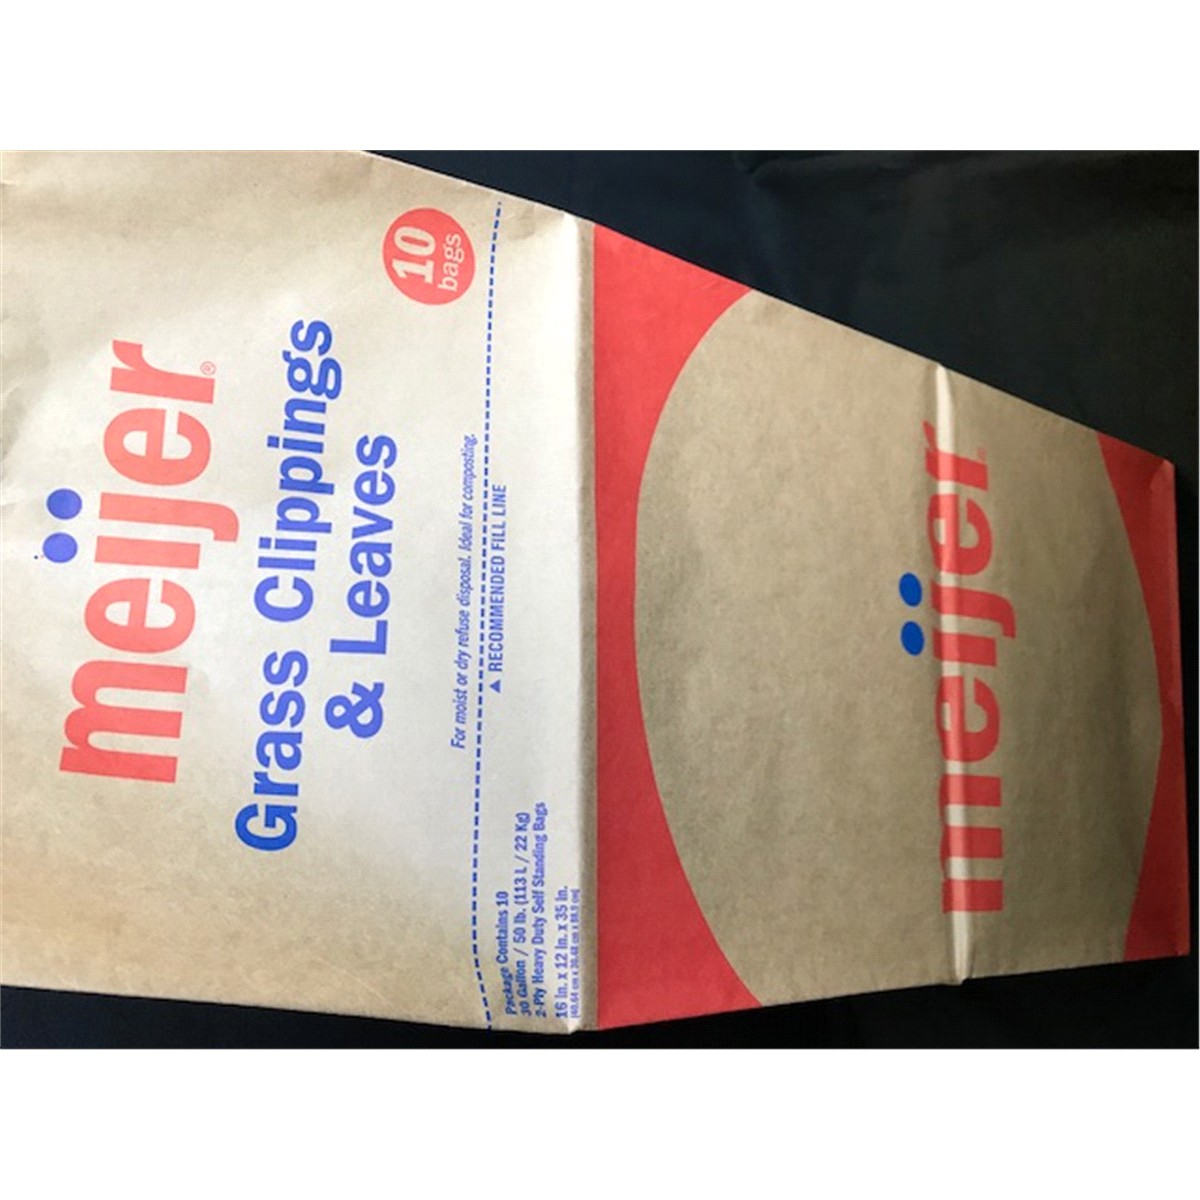 Meijer Paper Lawn and Leaf Bags 10pack